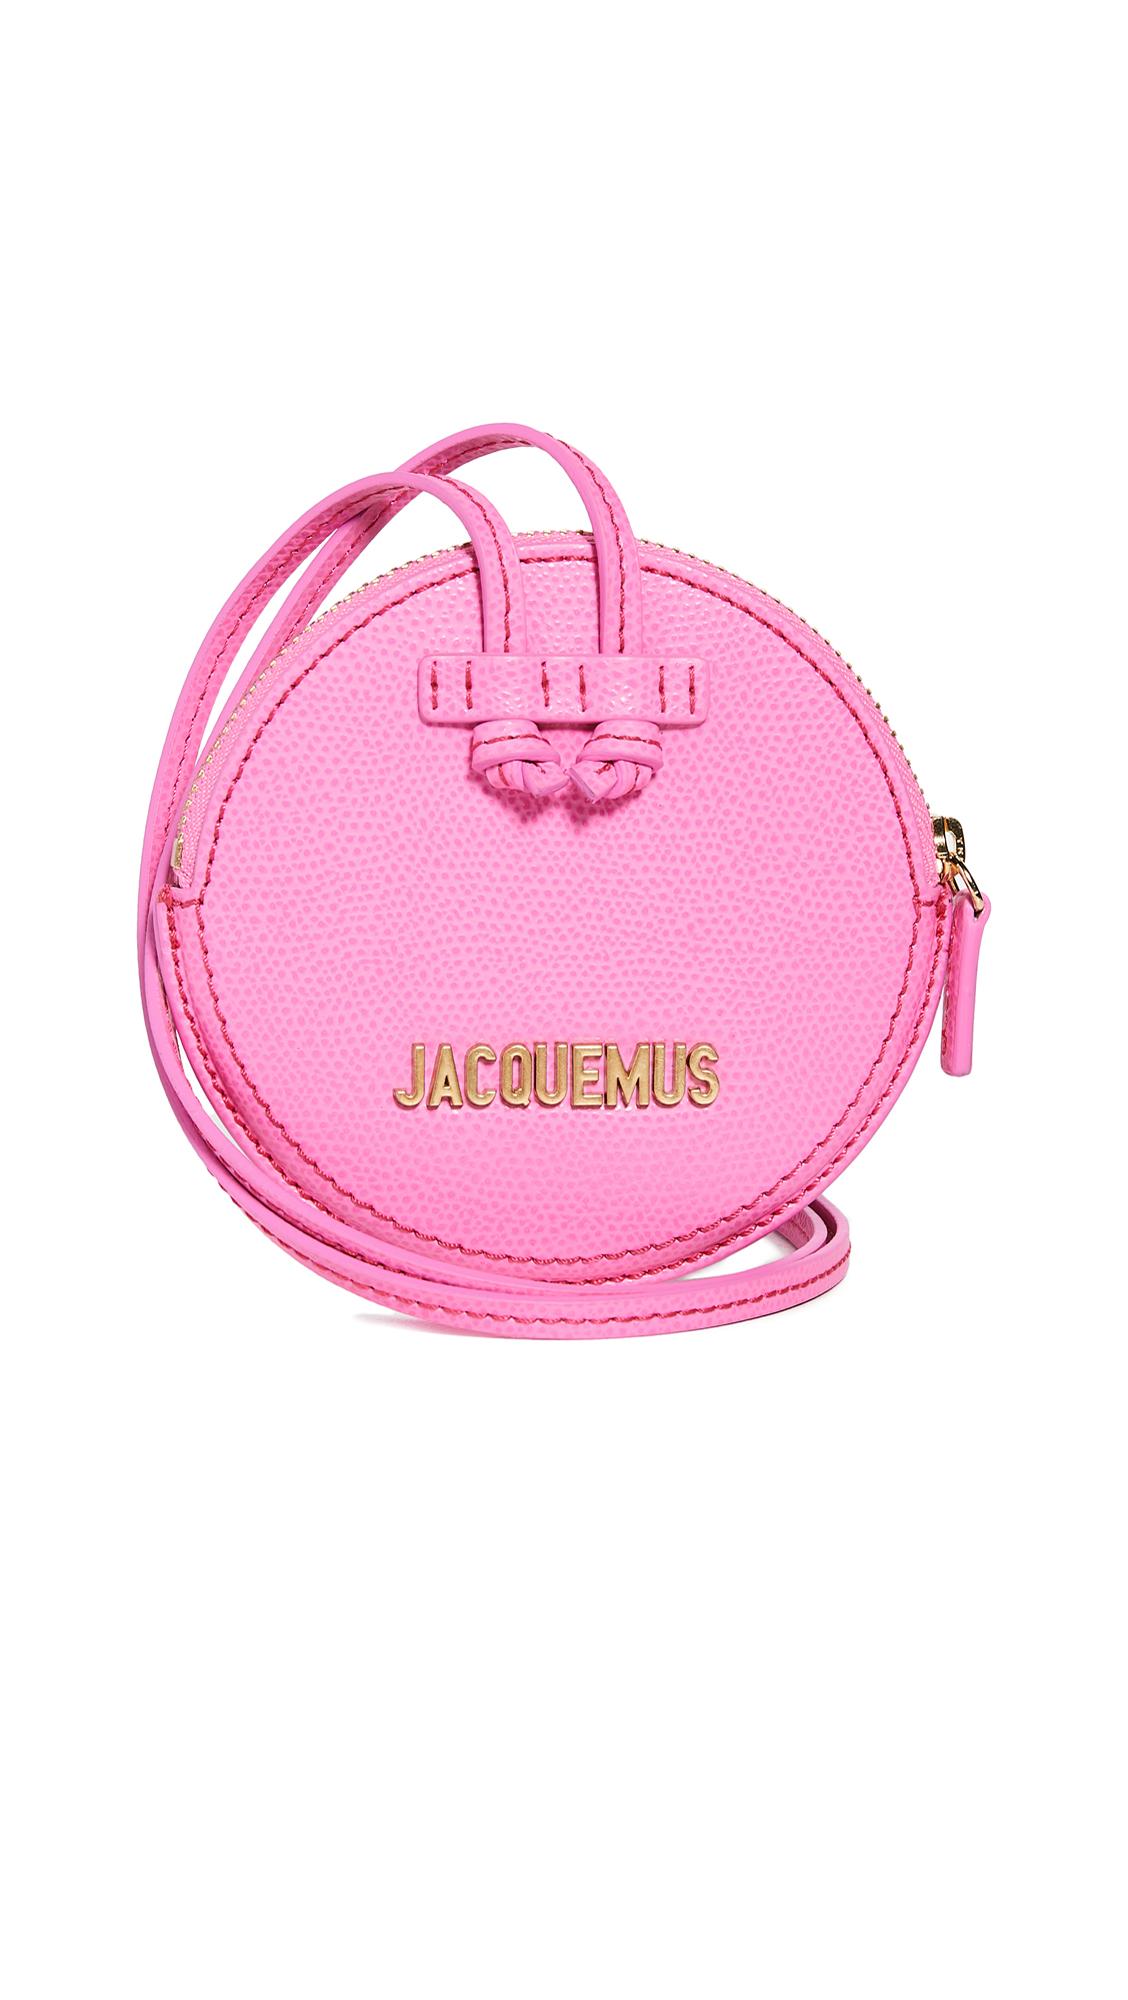 Jacquemus Leather Le Pitchou Coin Purse in Pink - Lyst